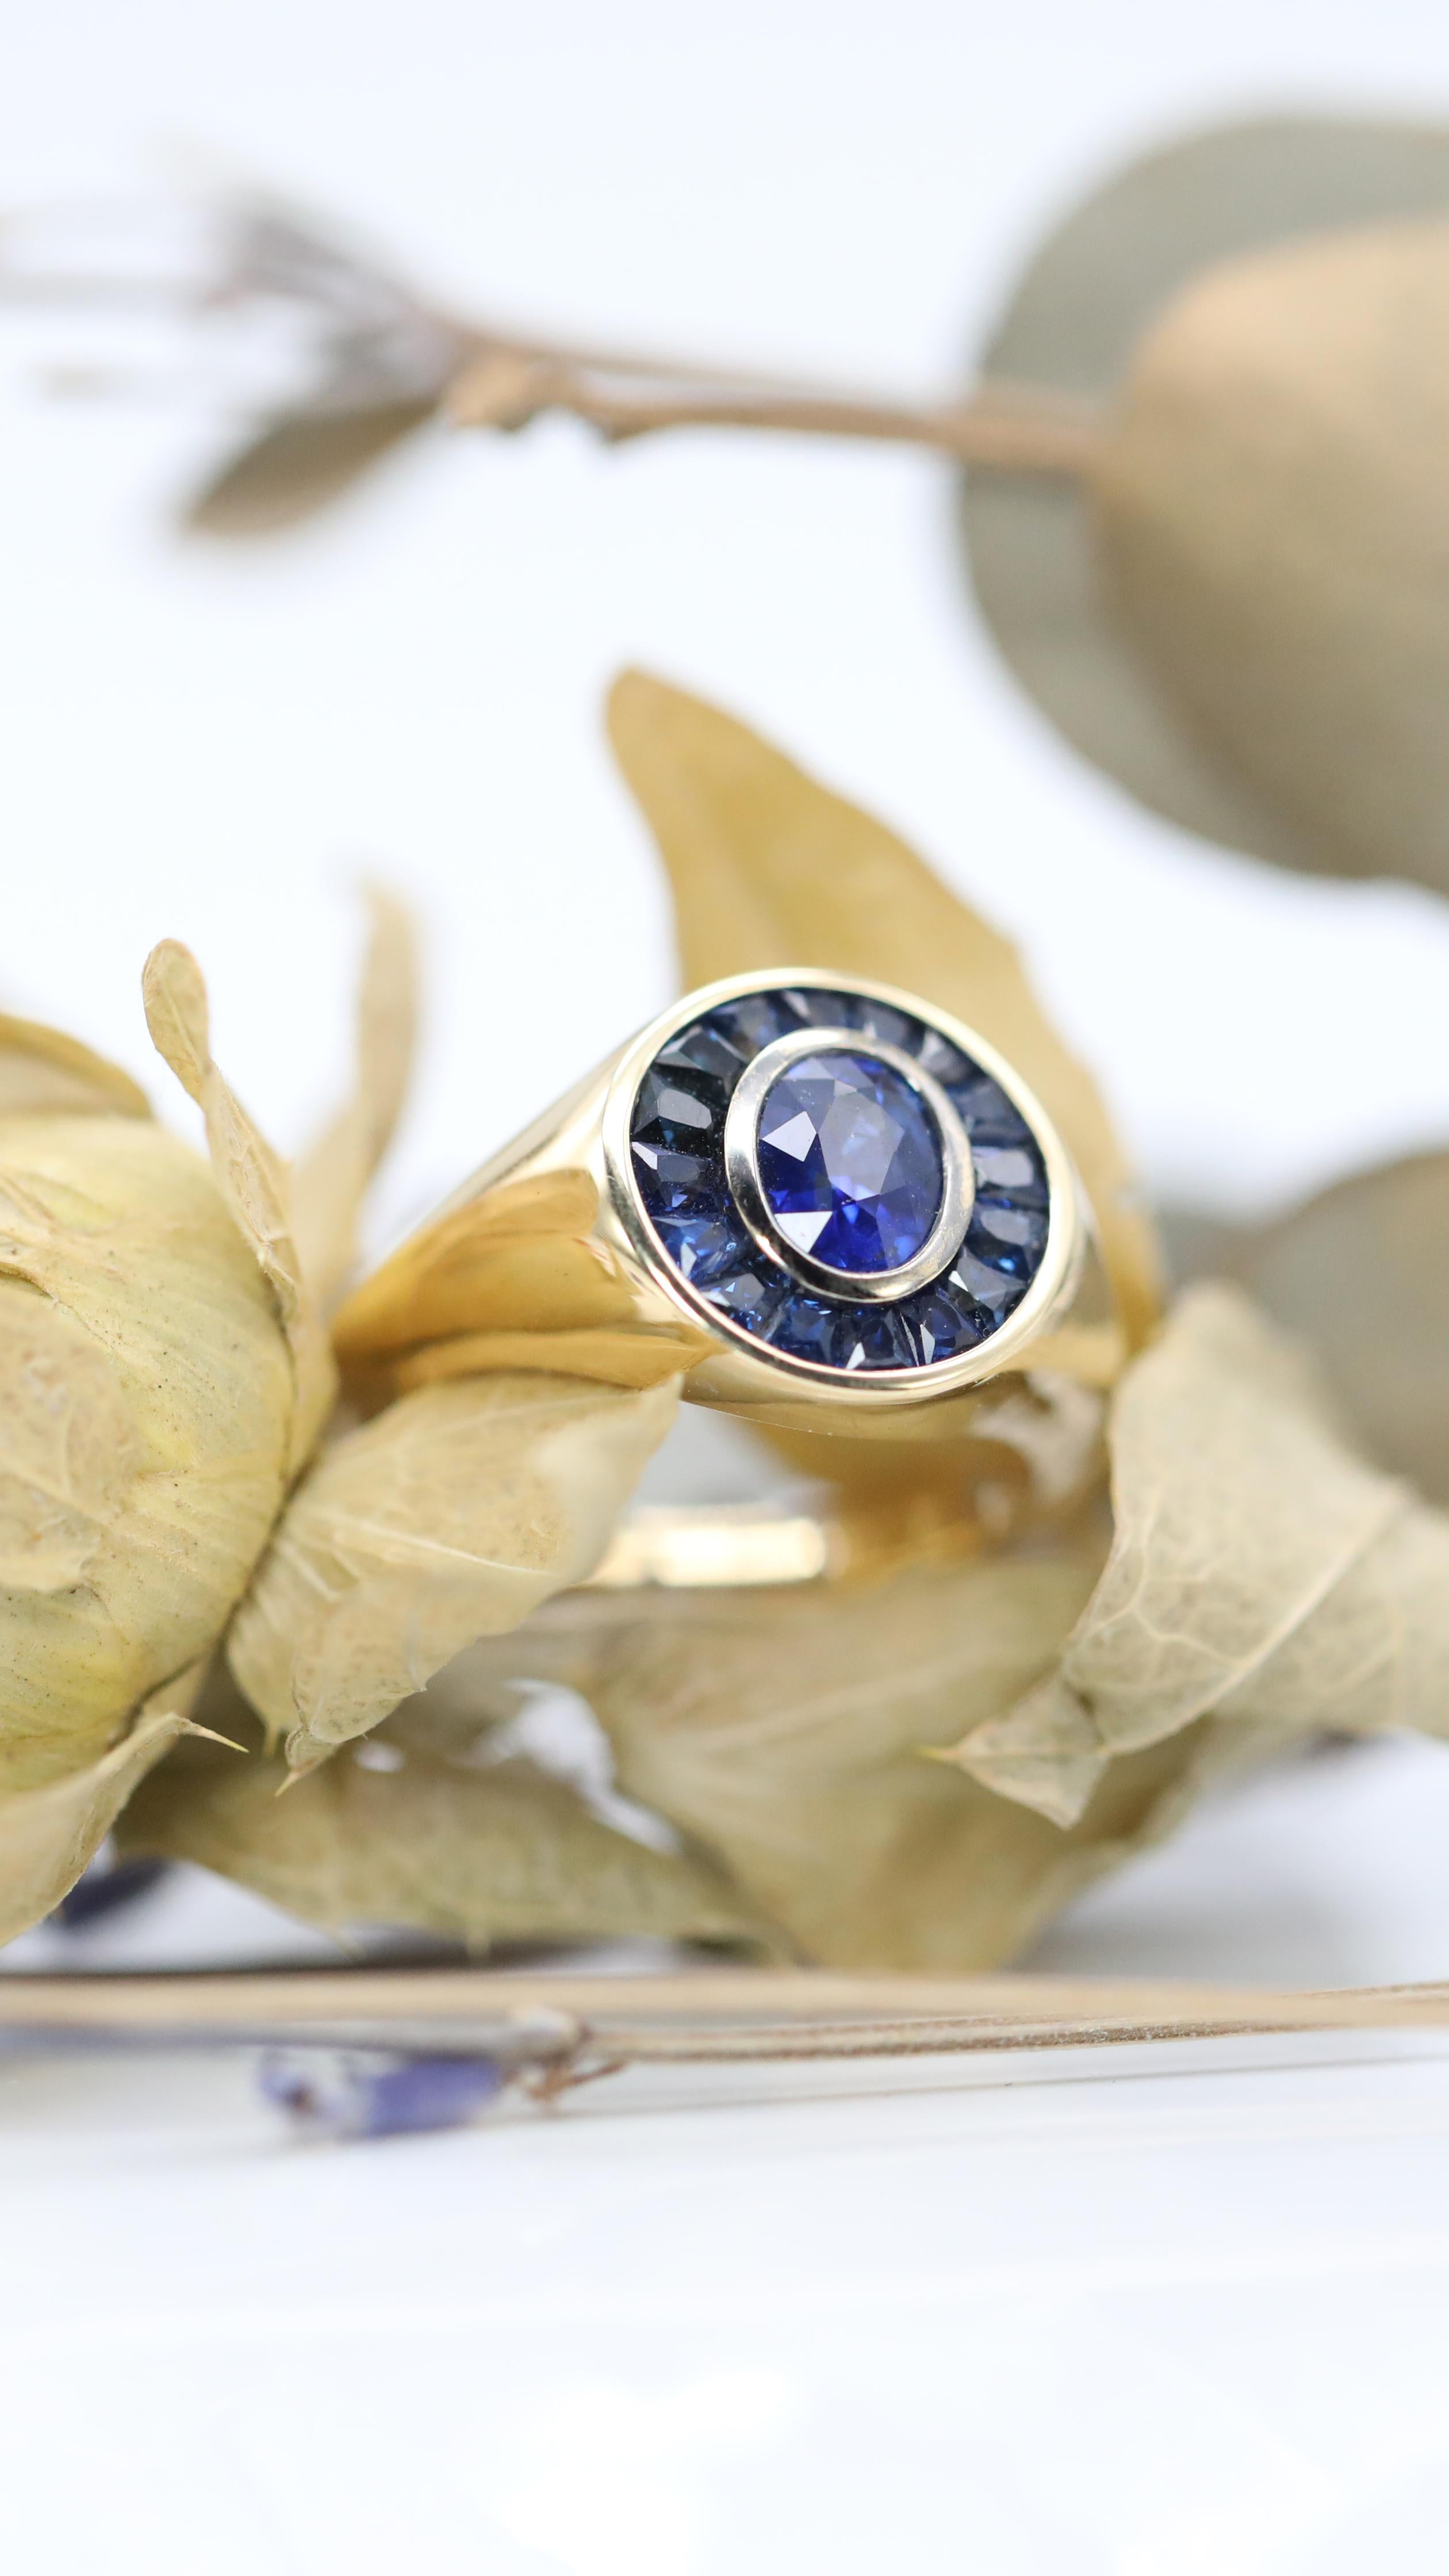 This ring is one of a kind.

18ct yellow gold band with a 1.12ct natural unheated certified Sri Lankan sapphire surrounded by hand-cut sapphire halo.